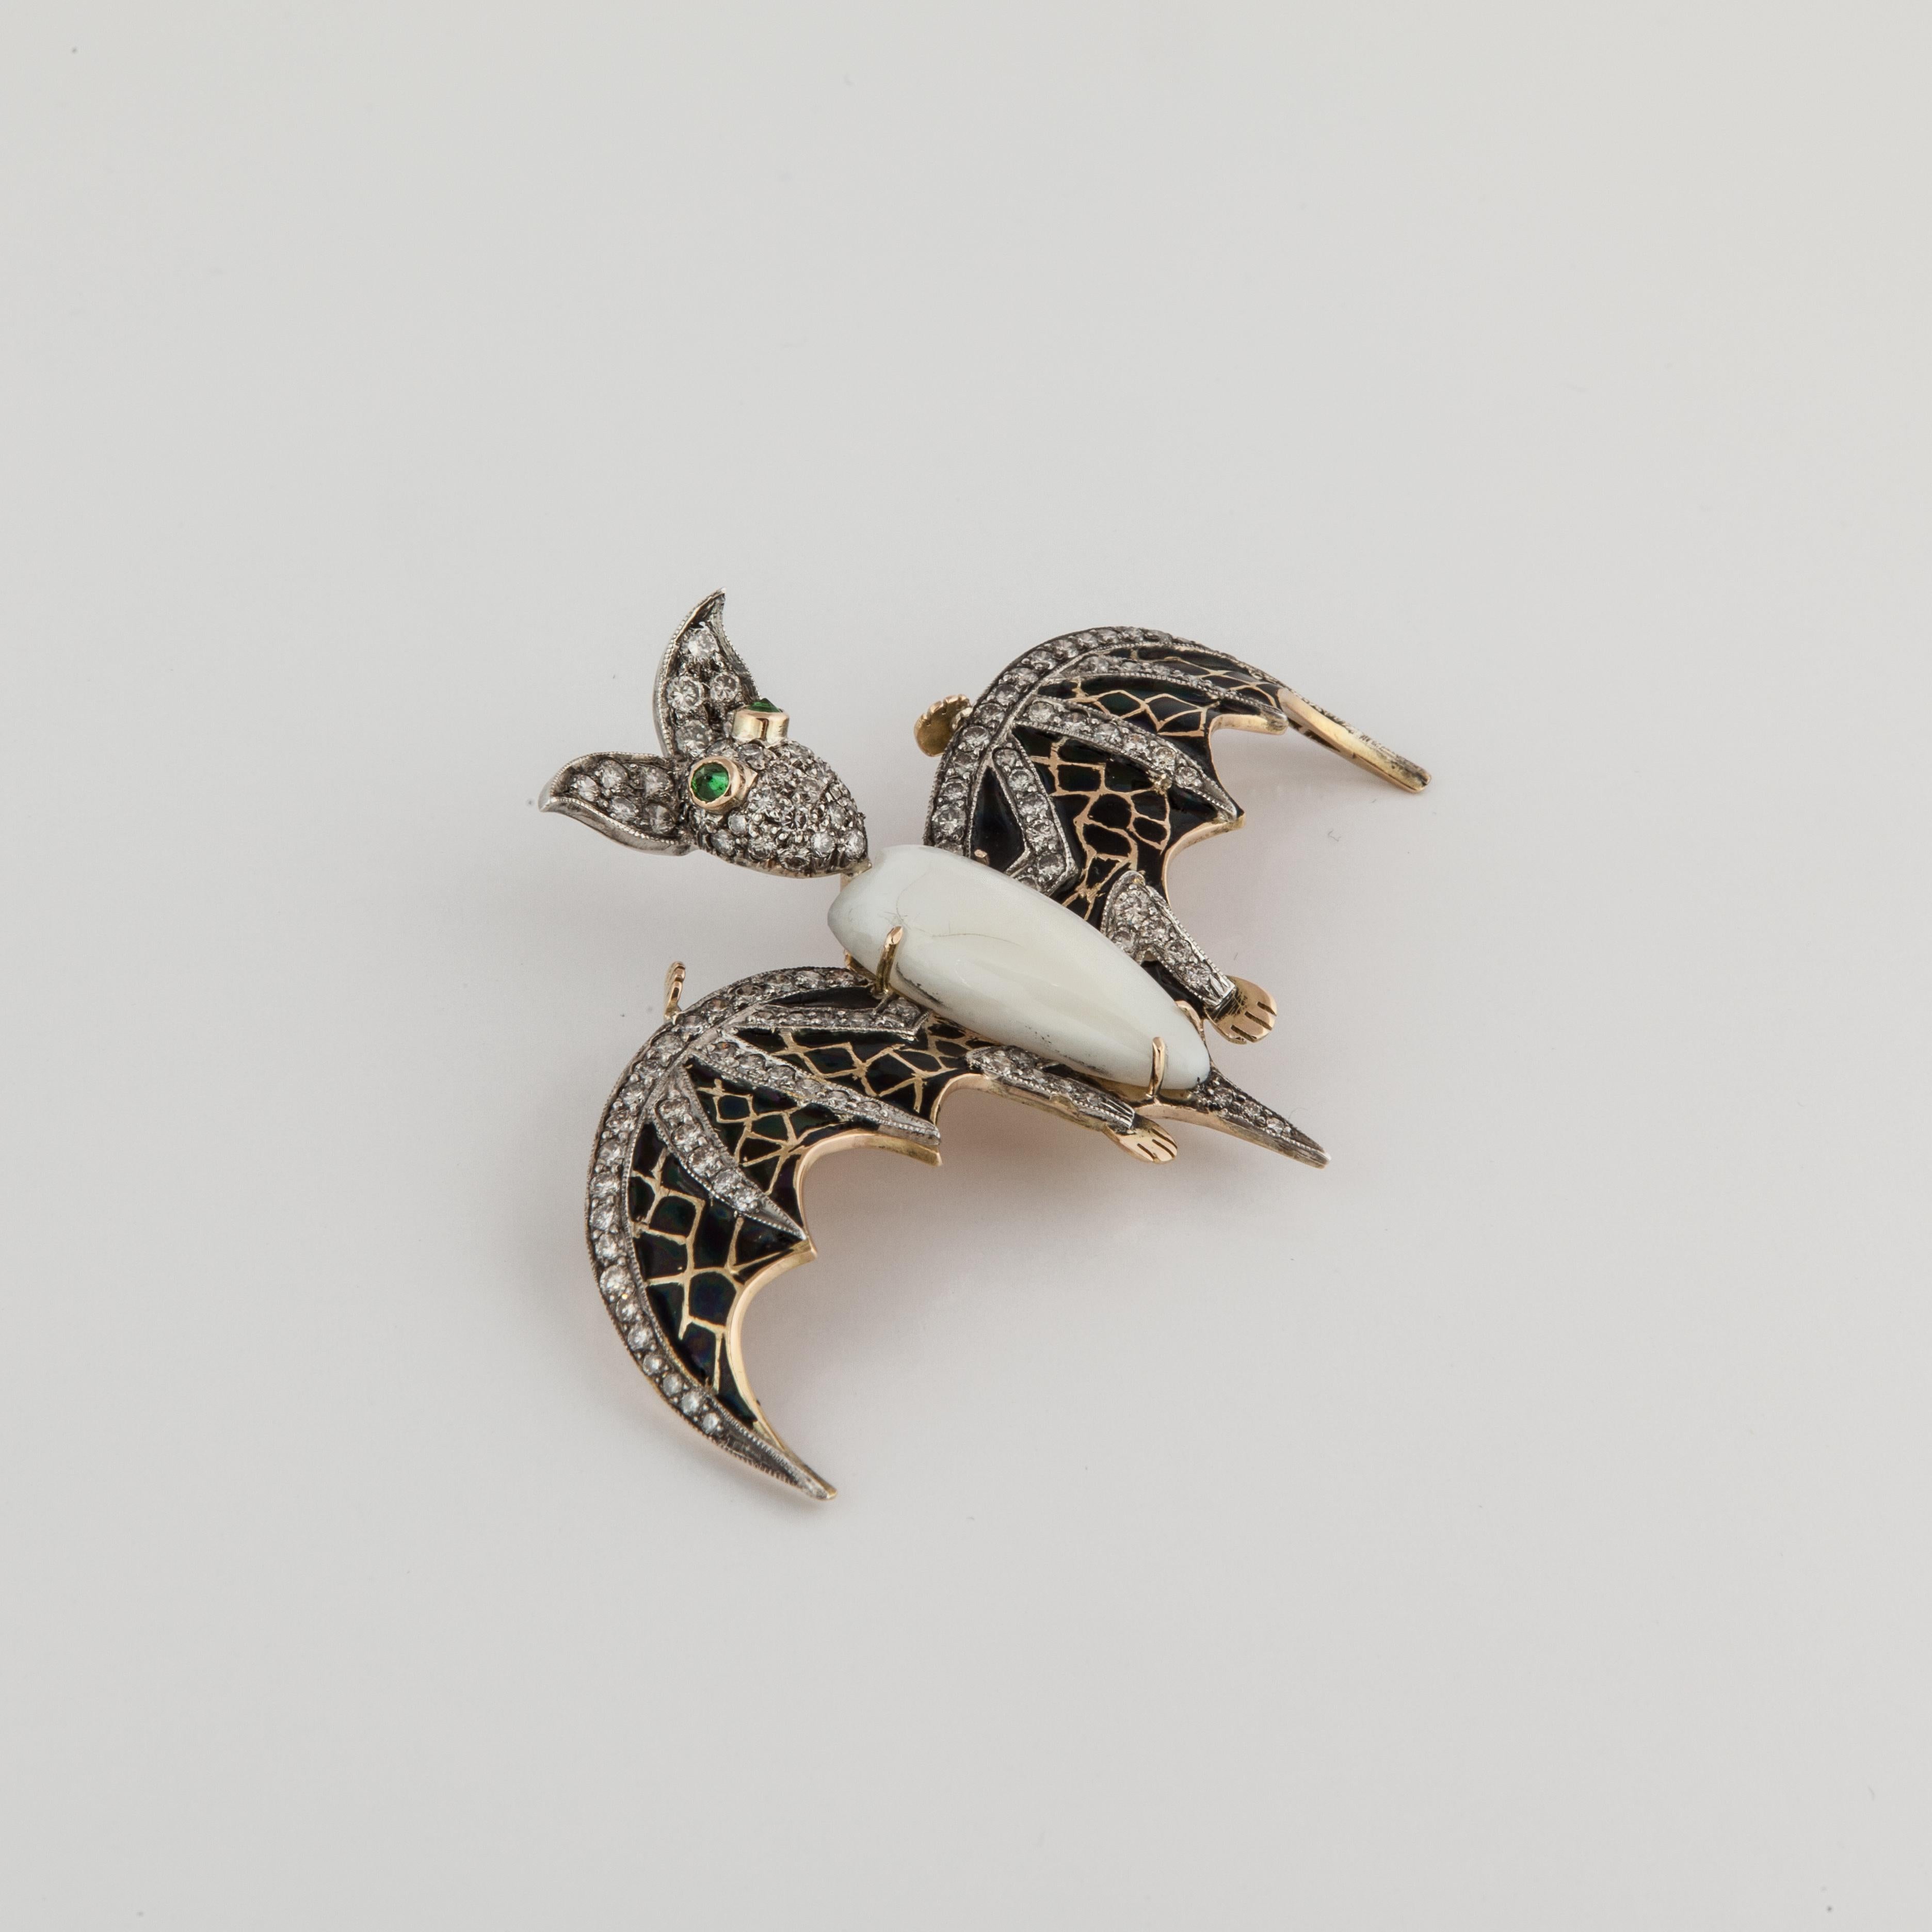 18K yellow gold and sterling silver bat pin.  The wings are enameled in black with diamond highlights (total diamond carat weight is 2.30).  The eyes are round emeralds and the body is mother of pearl.  Measures 2-7/8